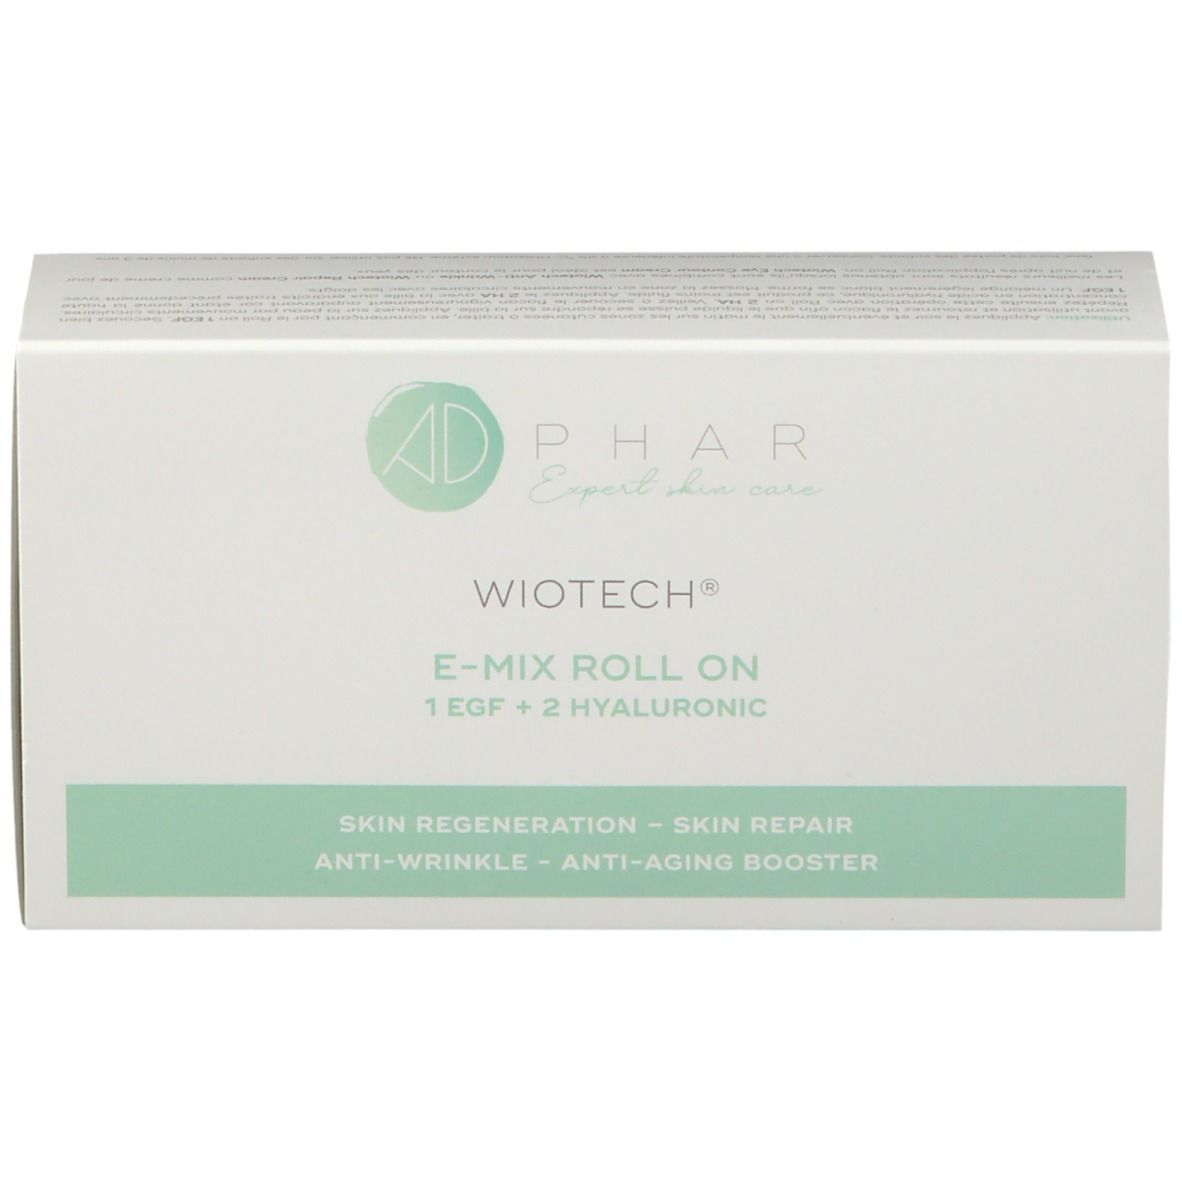 WIOTECH® Anti-Aging E-Mix Roll-On